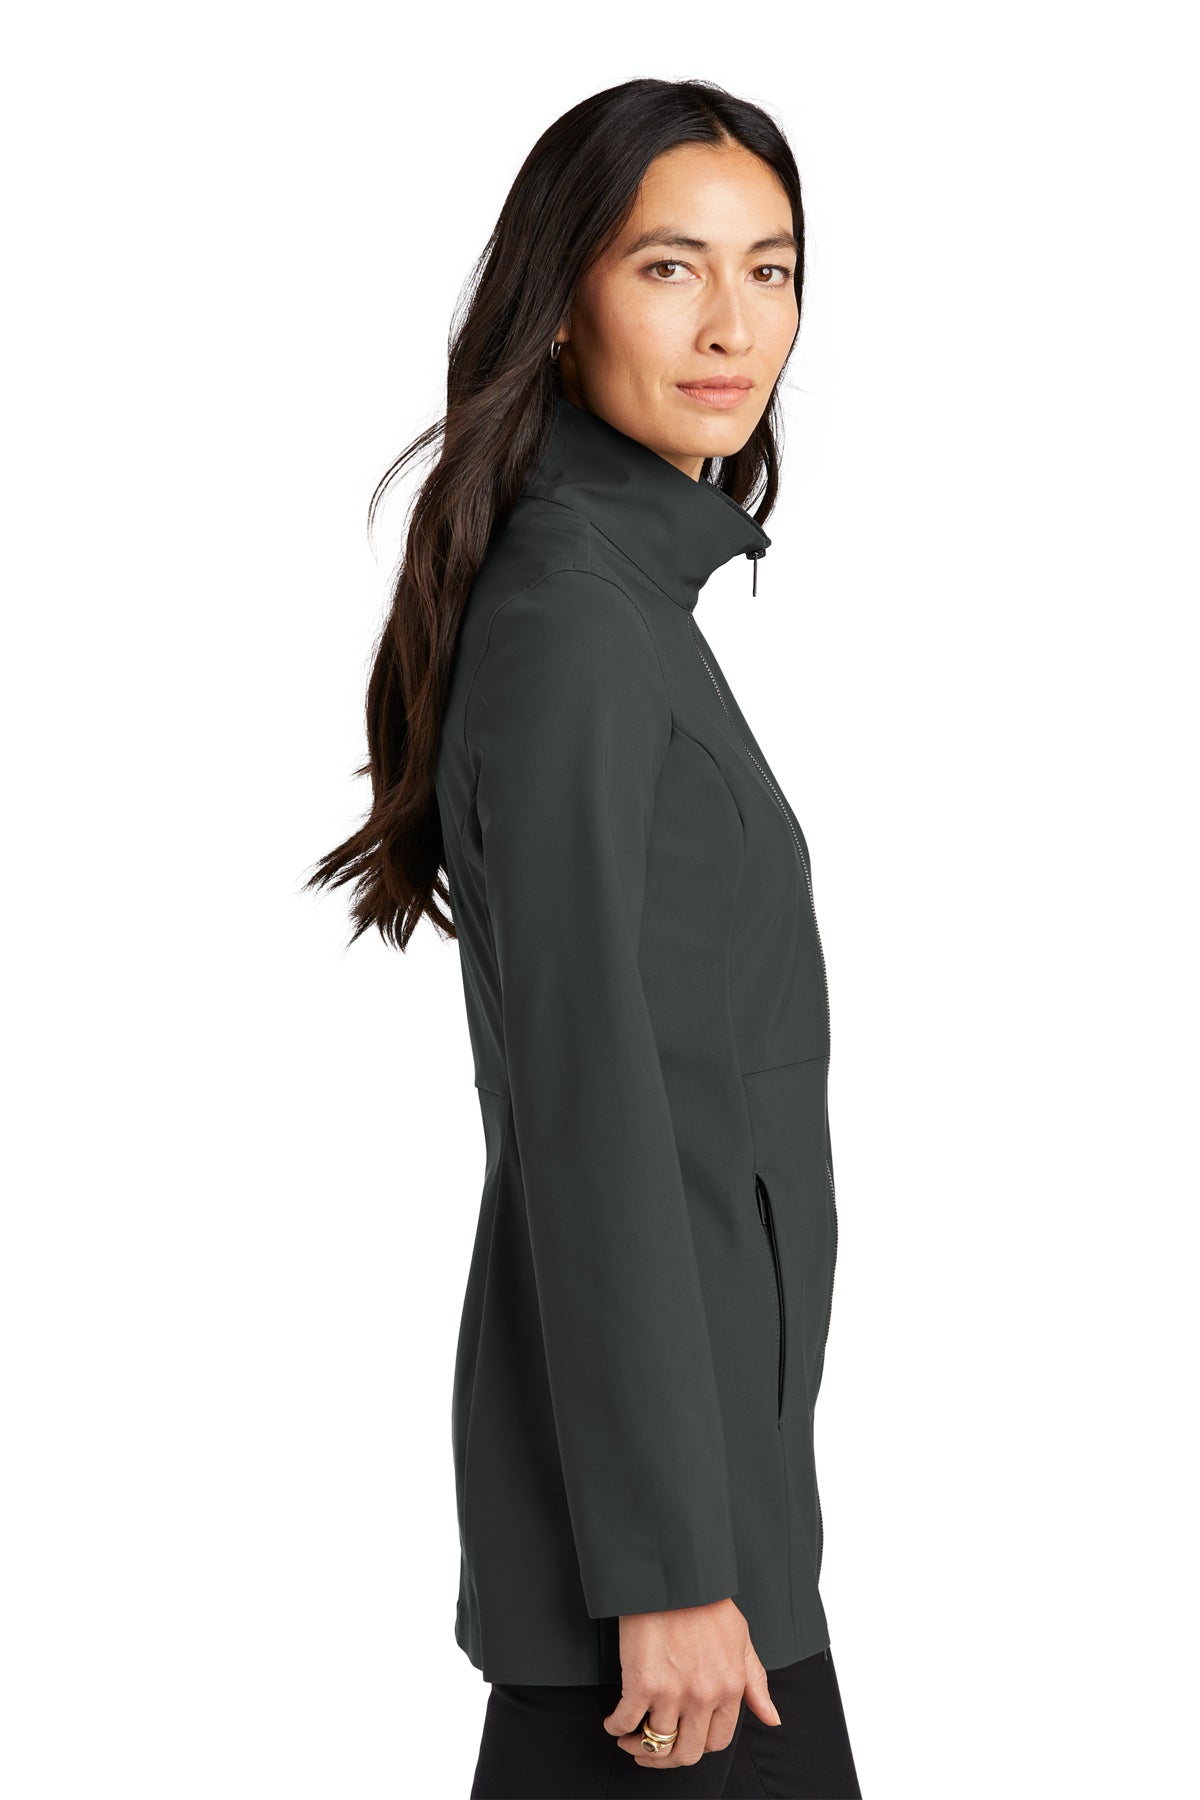 Faille Soft Shell Zip Up Coat - Anchor Grey (Ships in 1-2 Weeks)